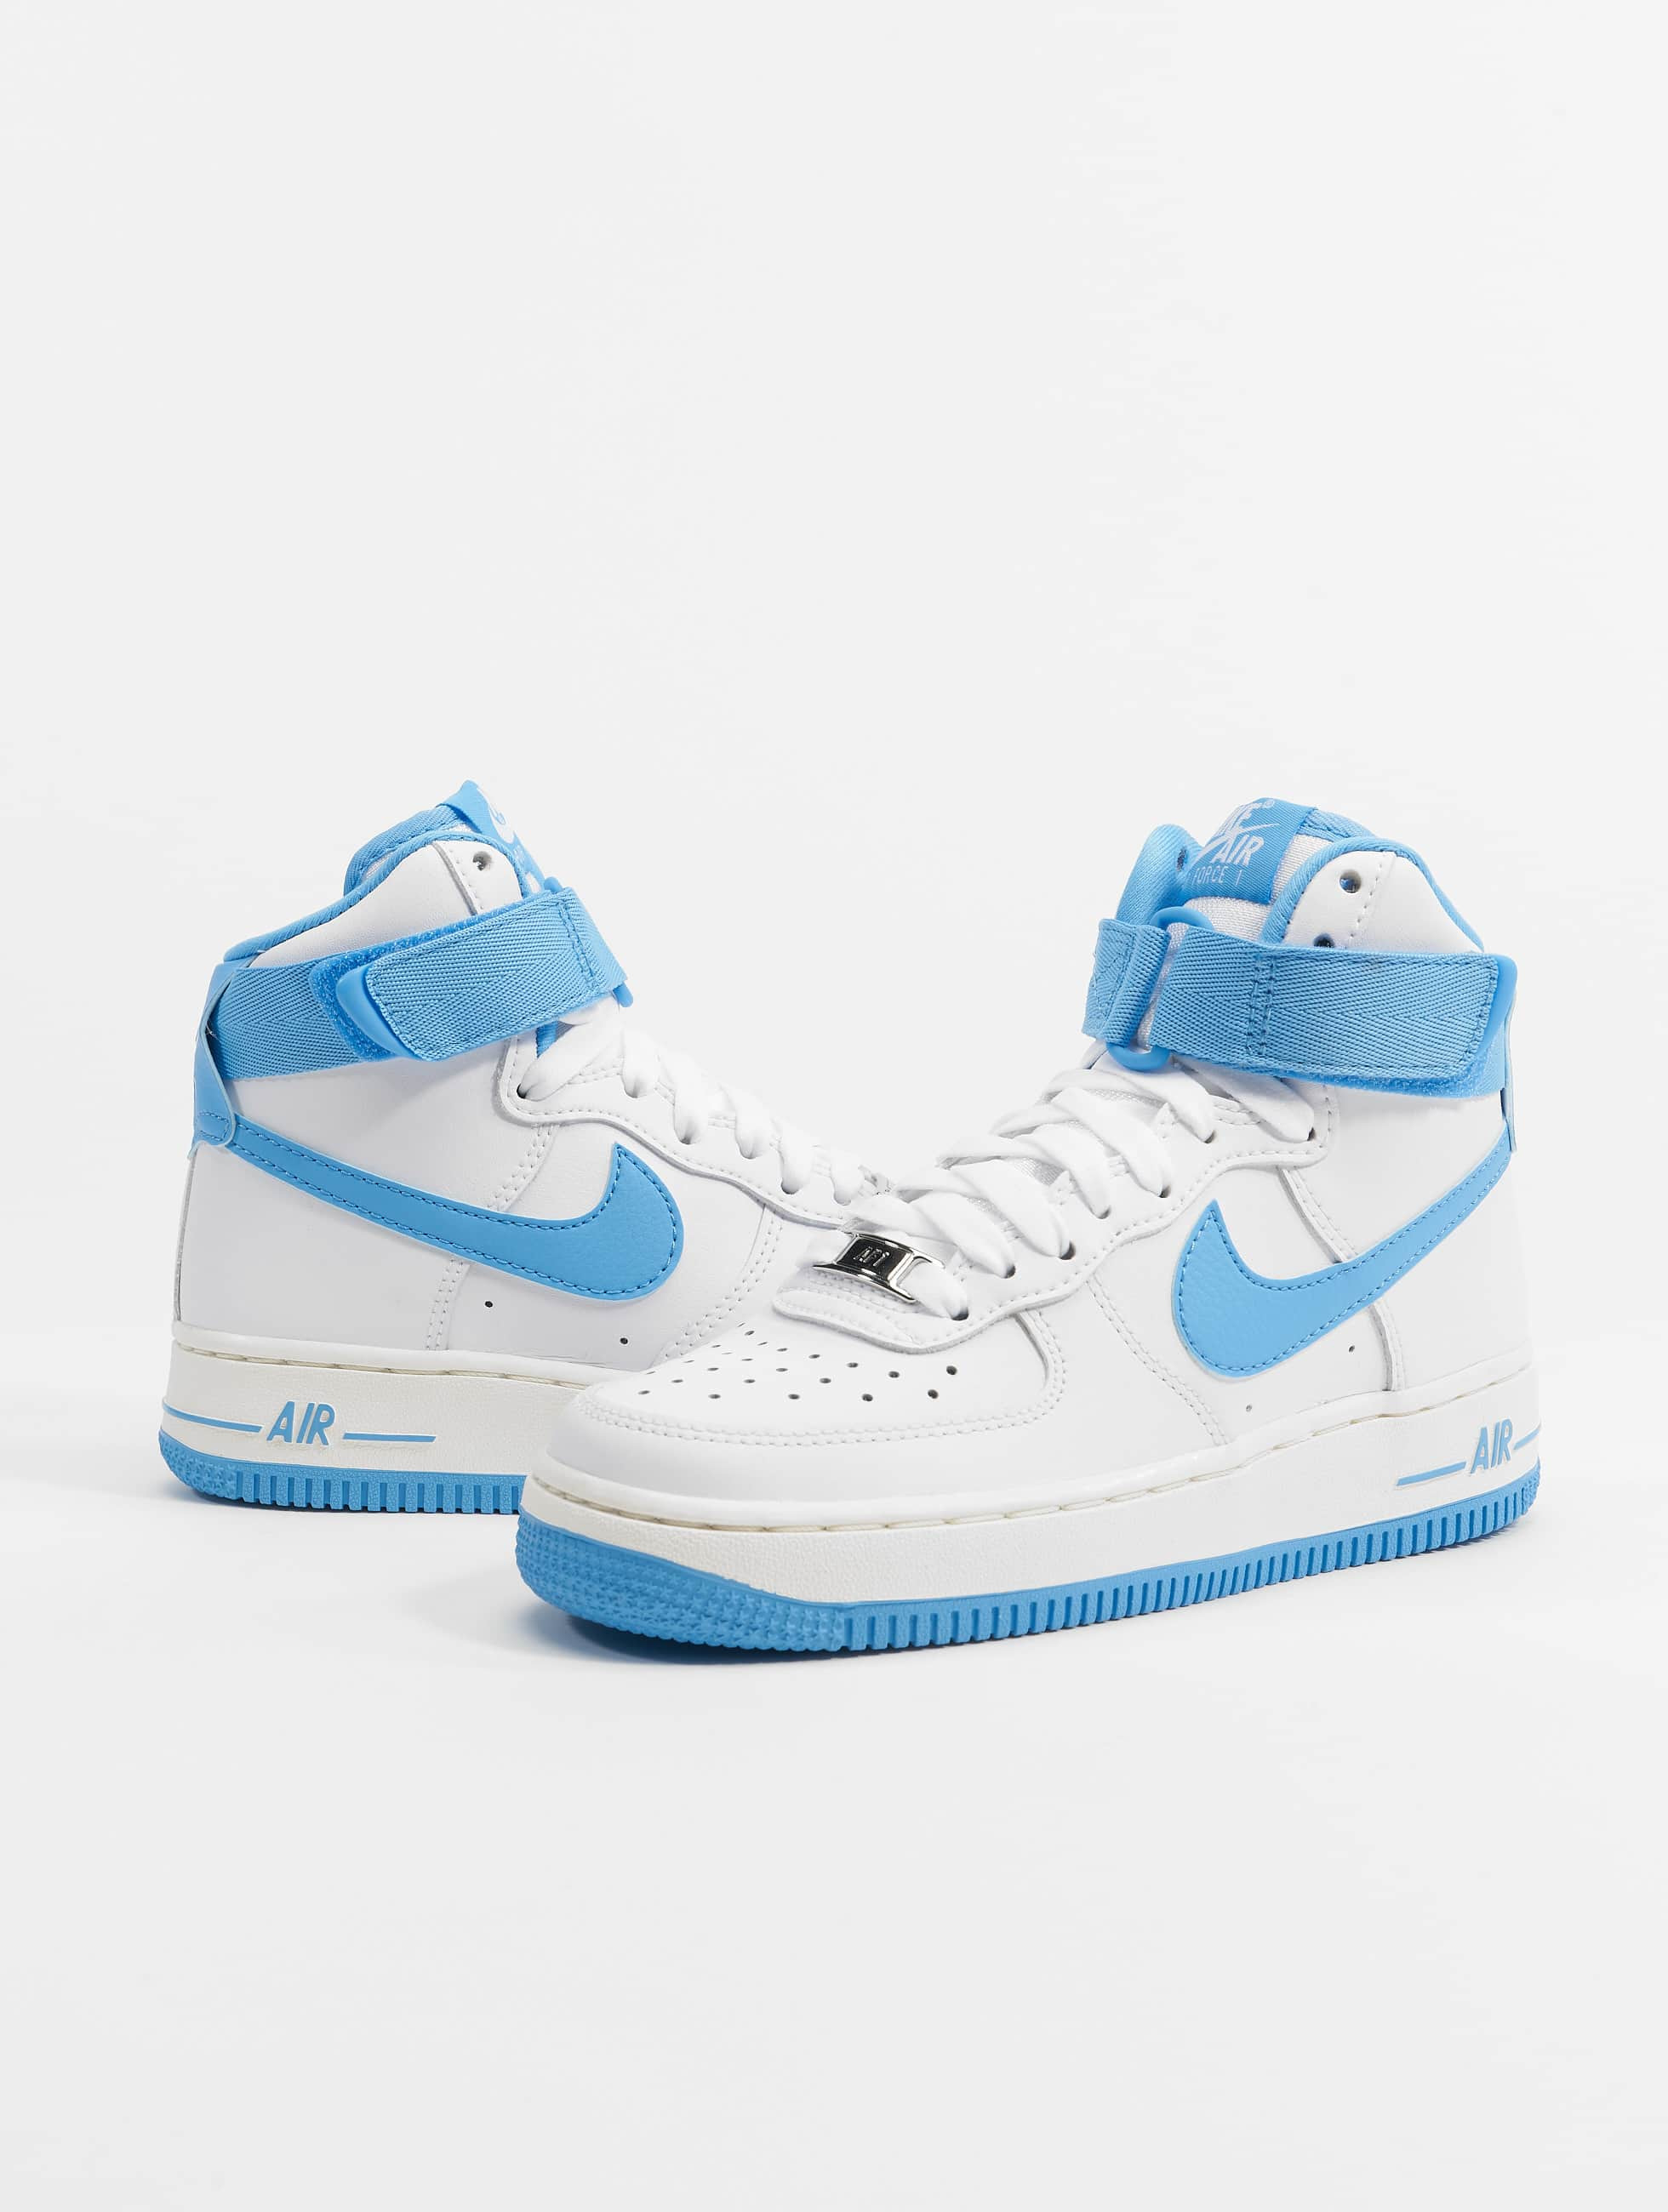 acoso exageración tráfico Nike Shoe / Sneakers Air Force 1 High Og Qs in white 982971